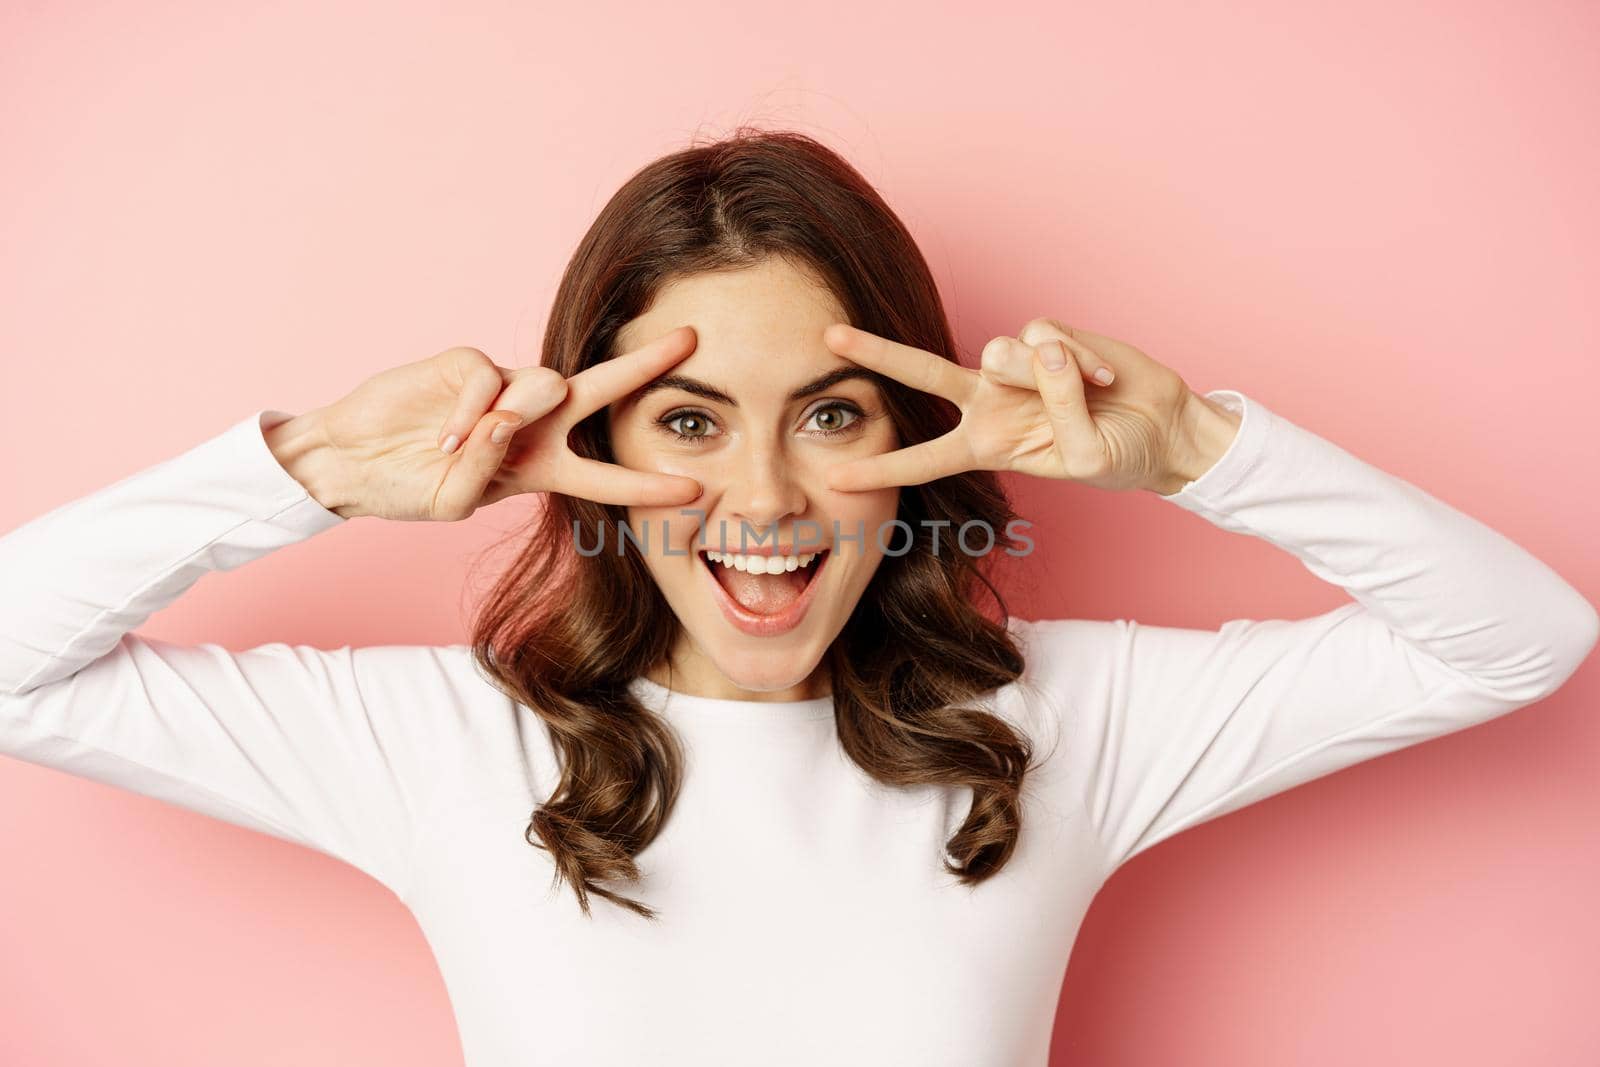 Close up portrait of coquettish young woman smiling, showing peace, v-sign gesture and posing happy, standing against pink background.